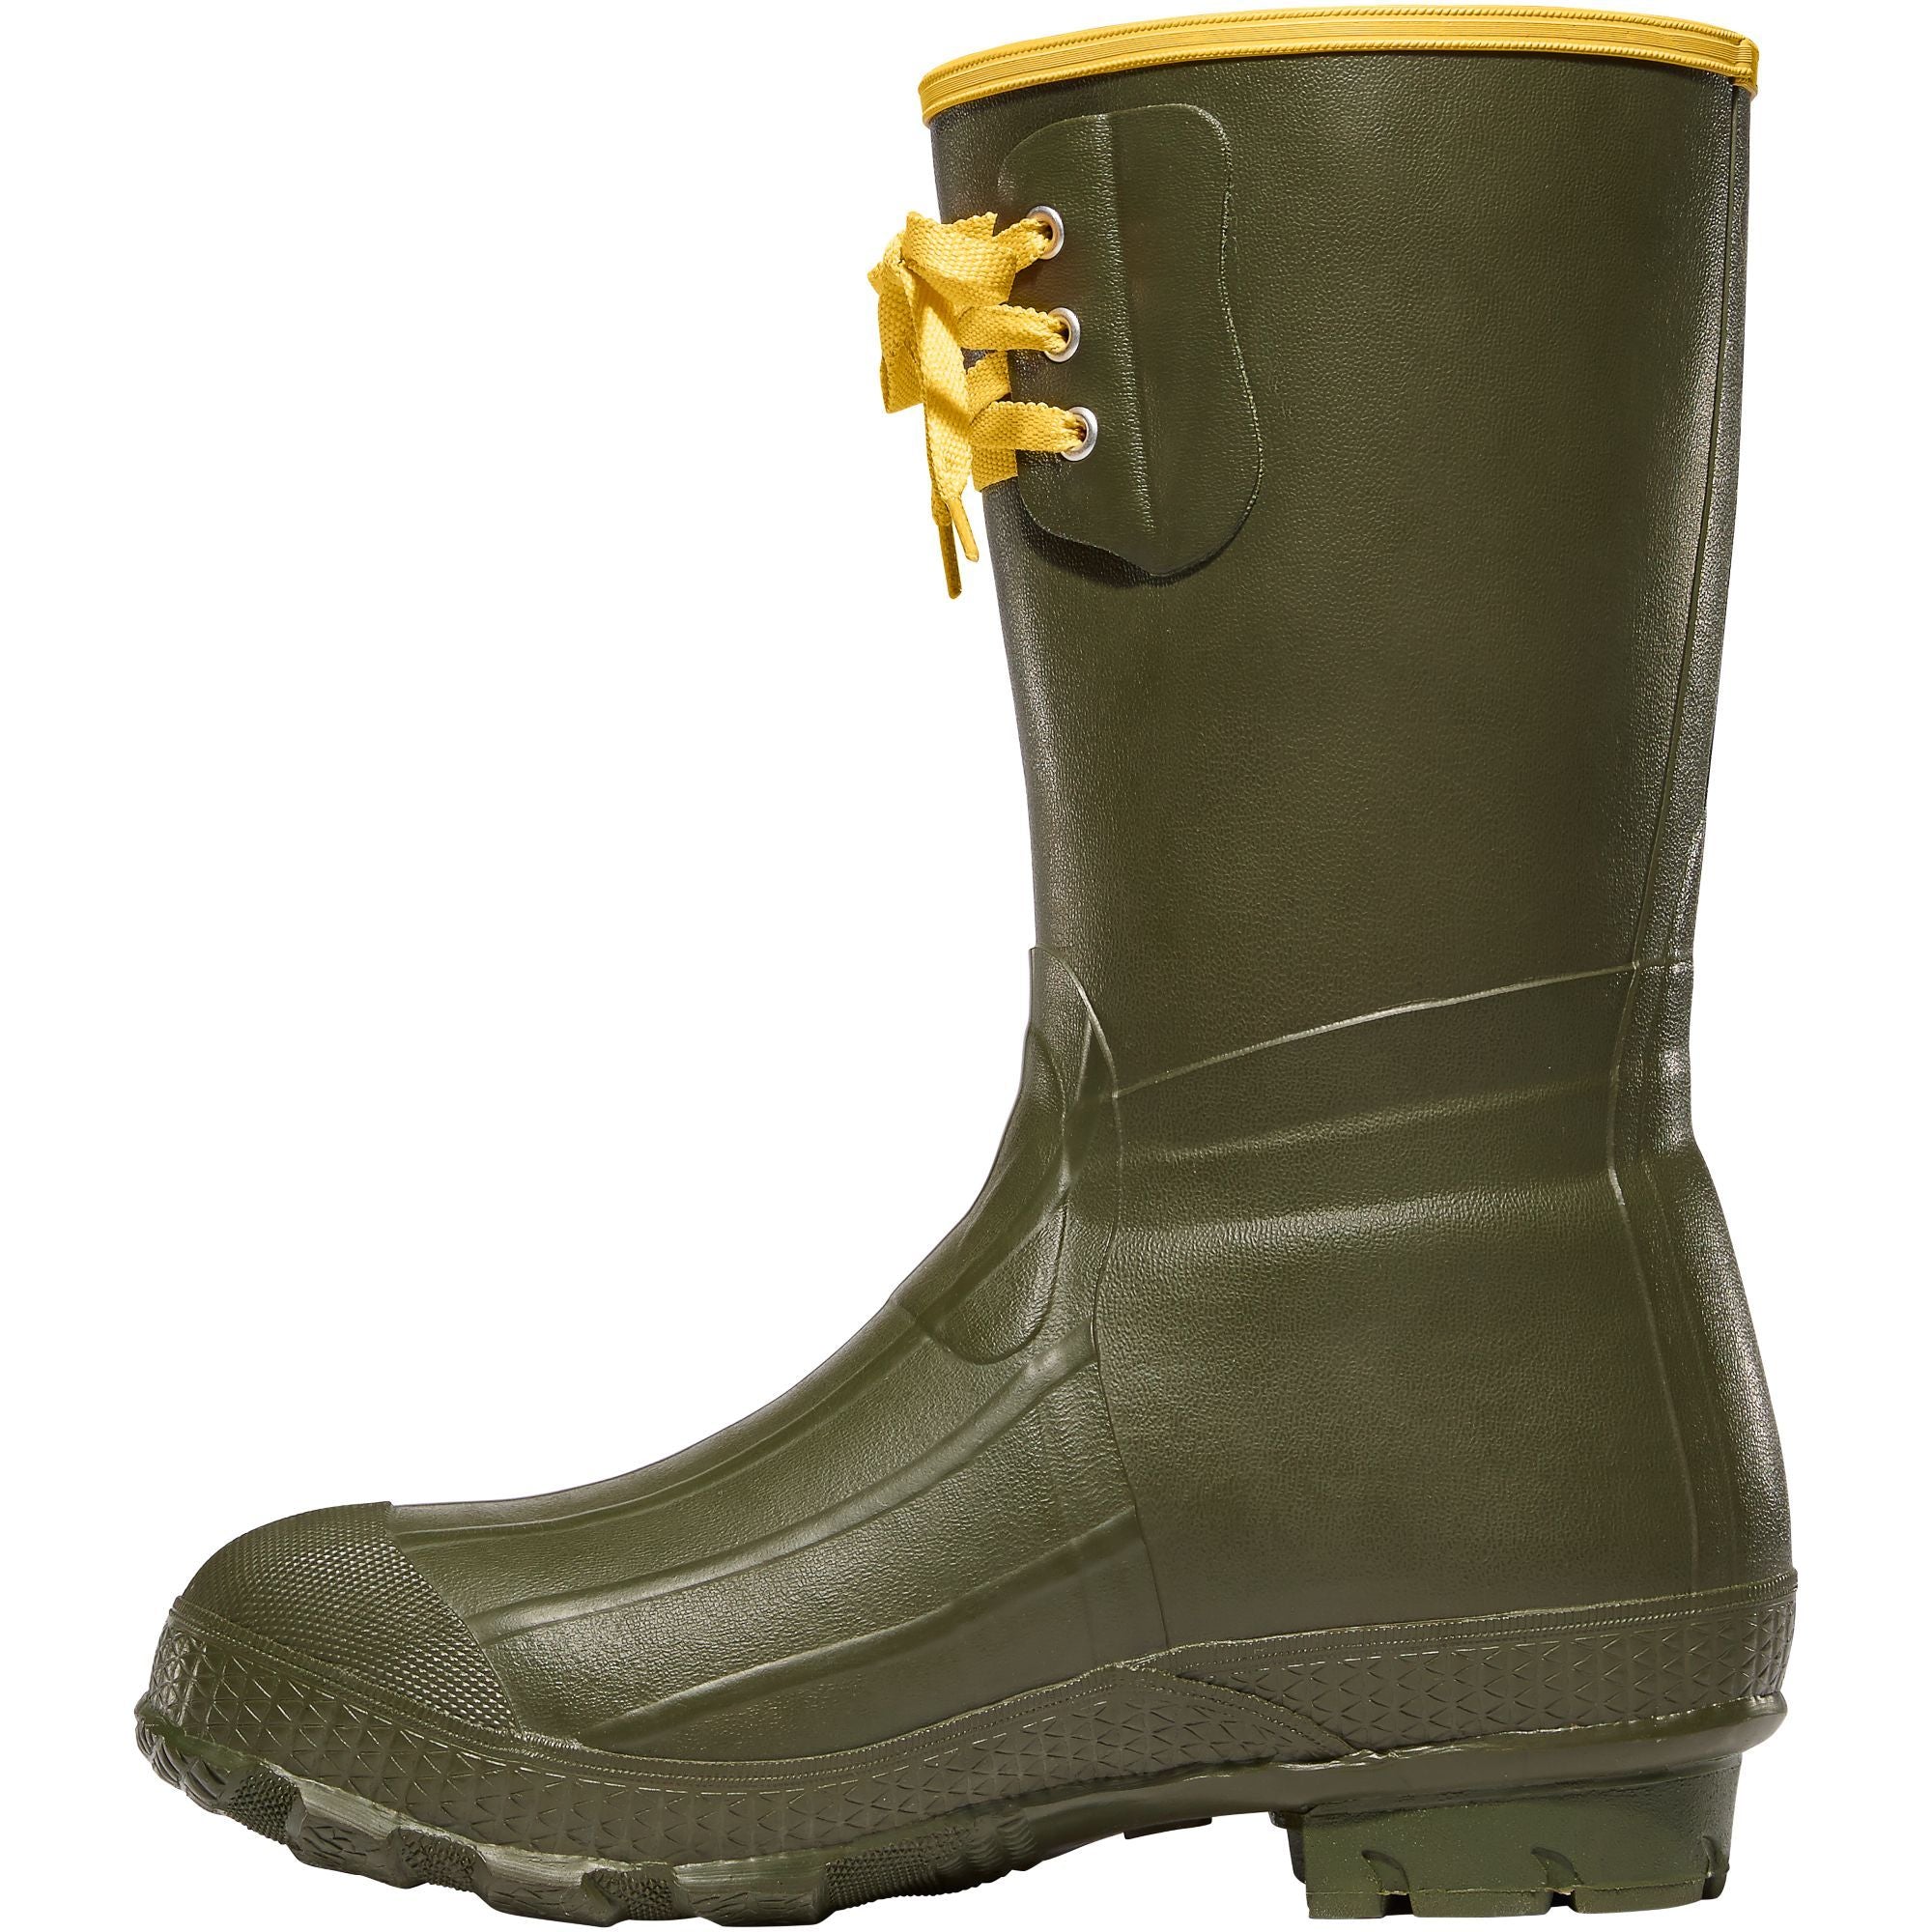 LaCrosse Men's Insulated Pac 12" Rubber Work Boot - Green - 260040  - Overlook Boots